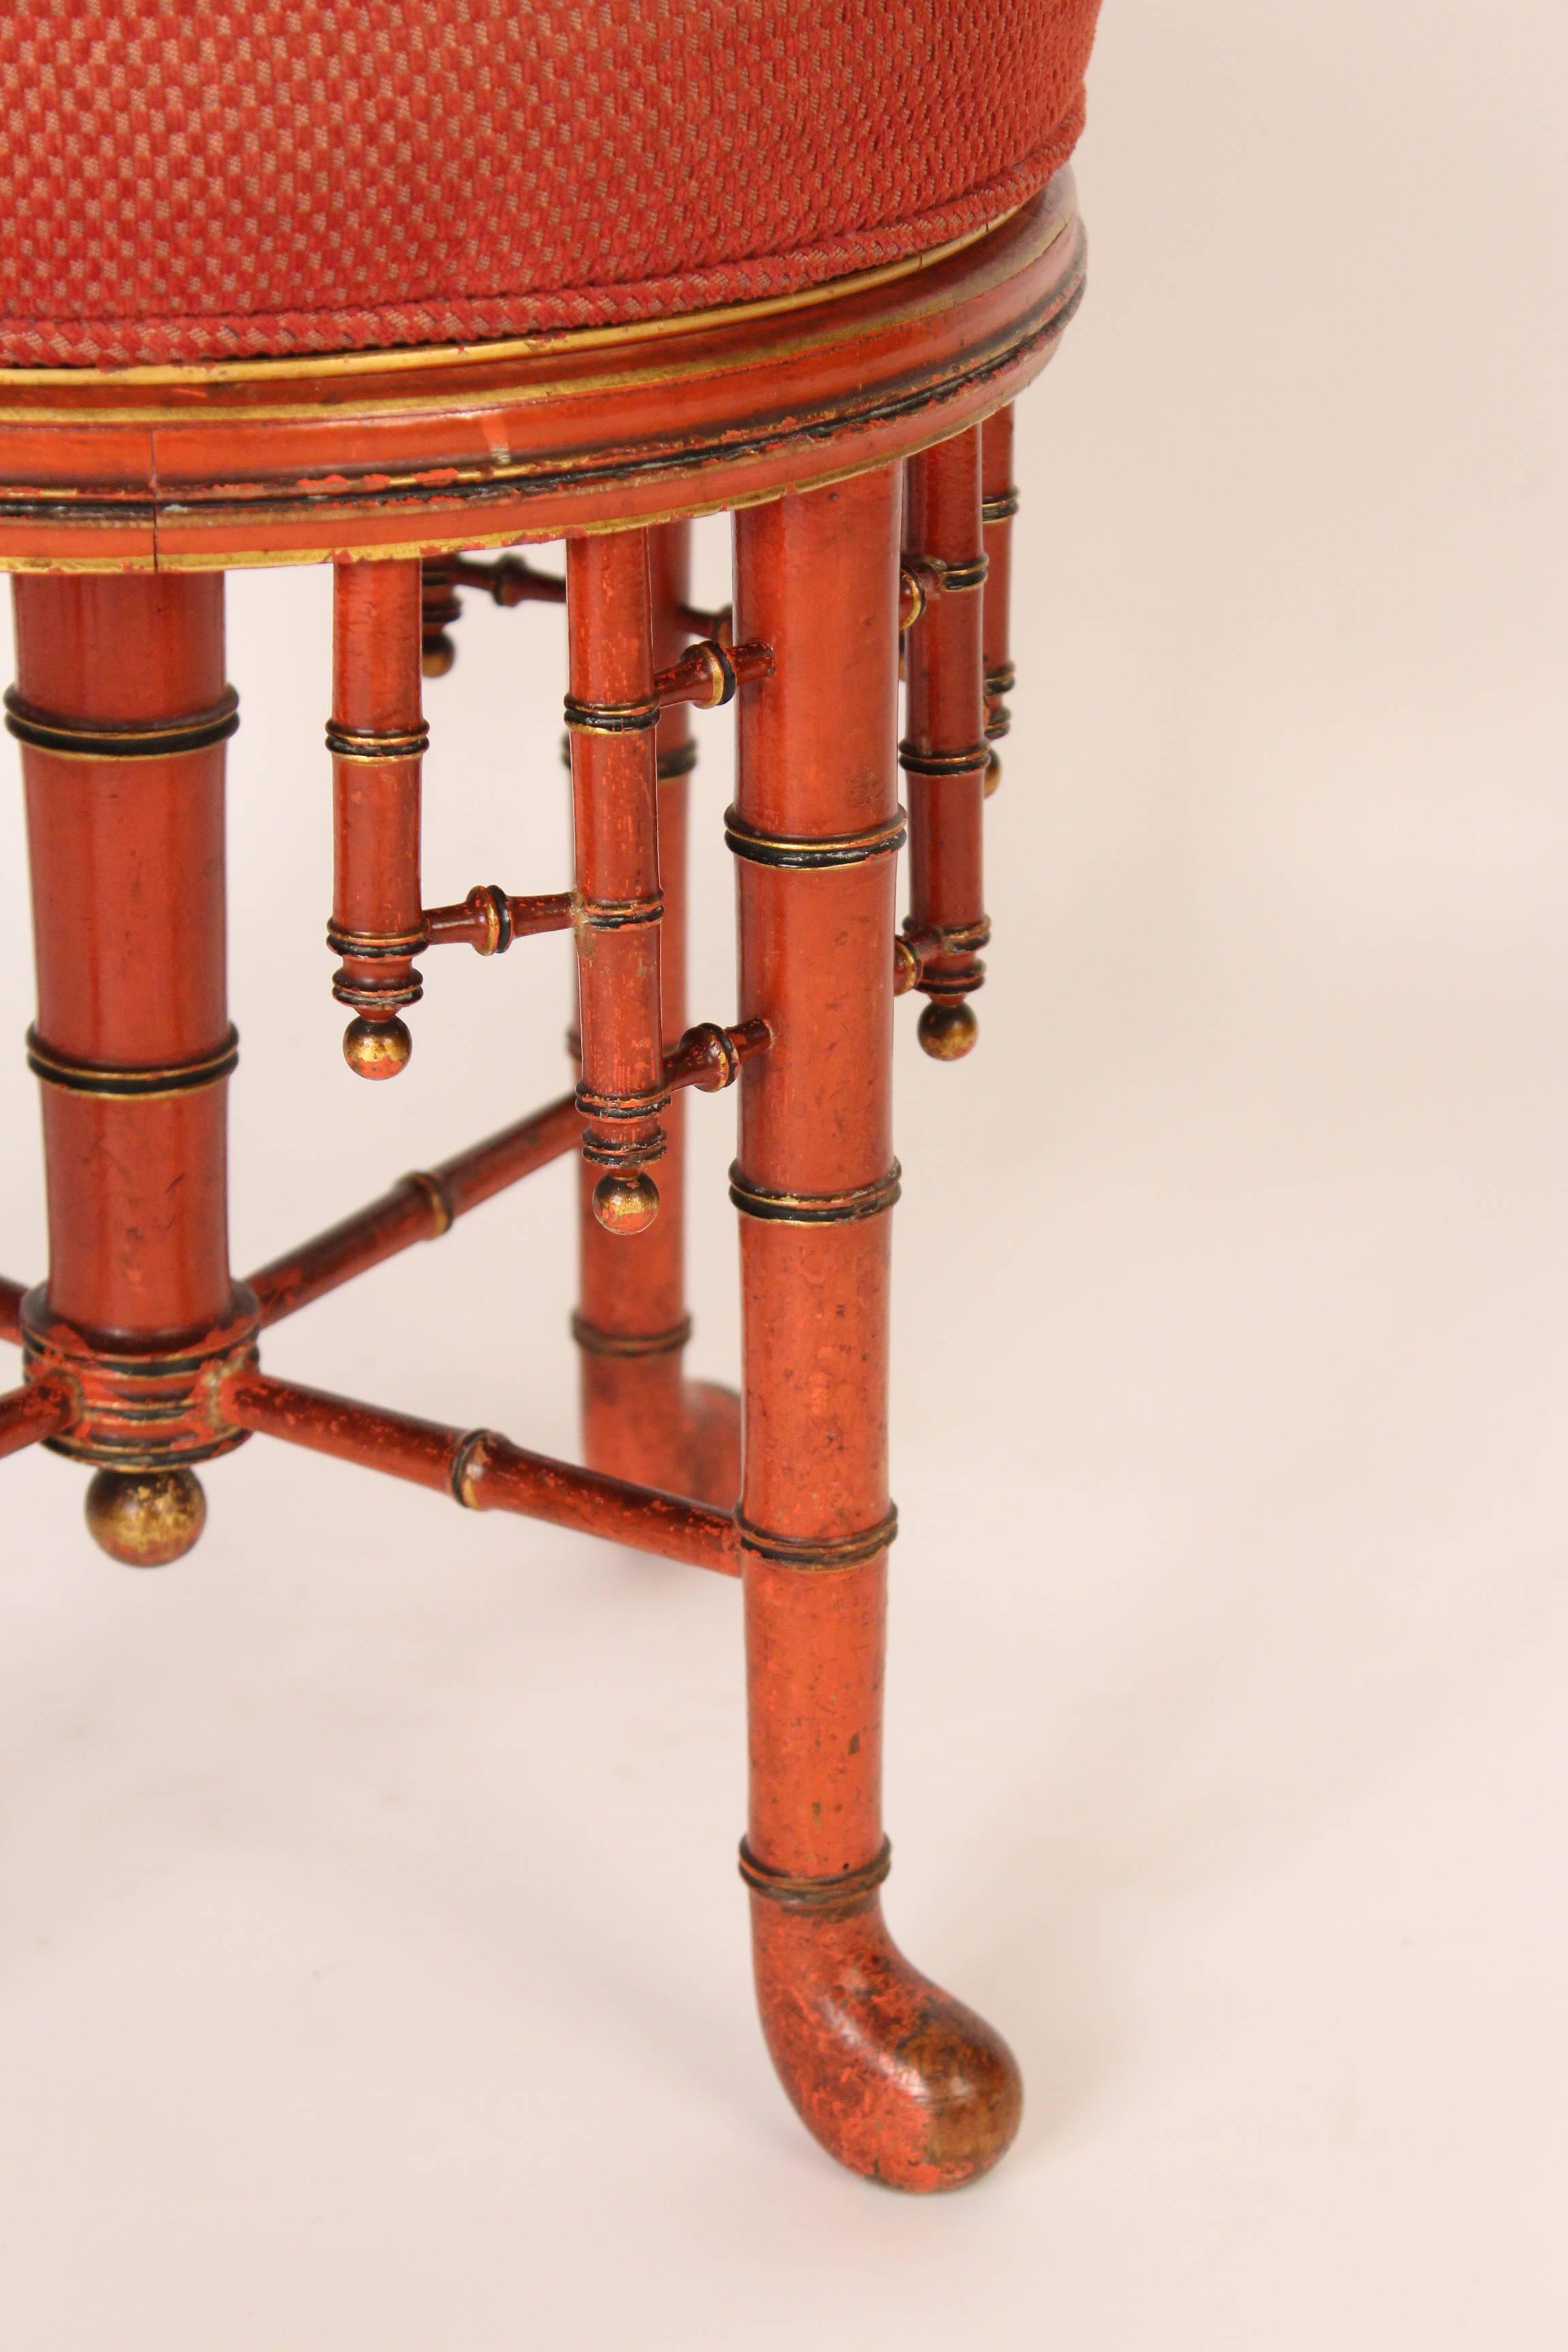 Napoleon III style red painted and partial-gilt faux bamboo stool, circa 1920. The top swivels but does not adjust up or down.